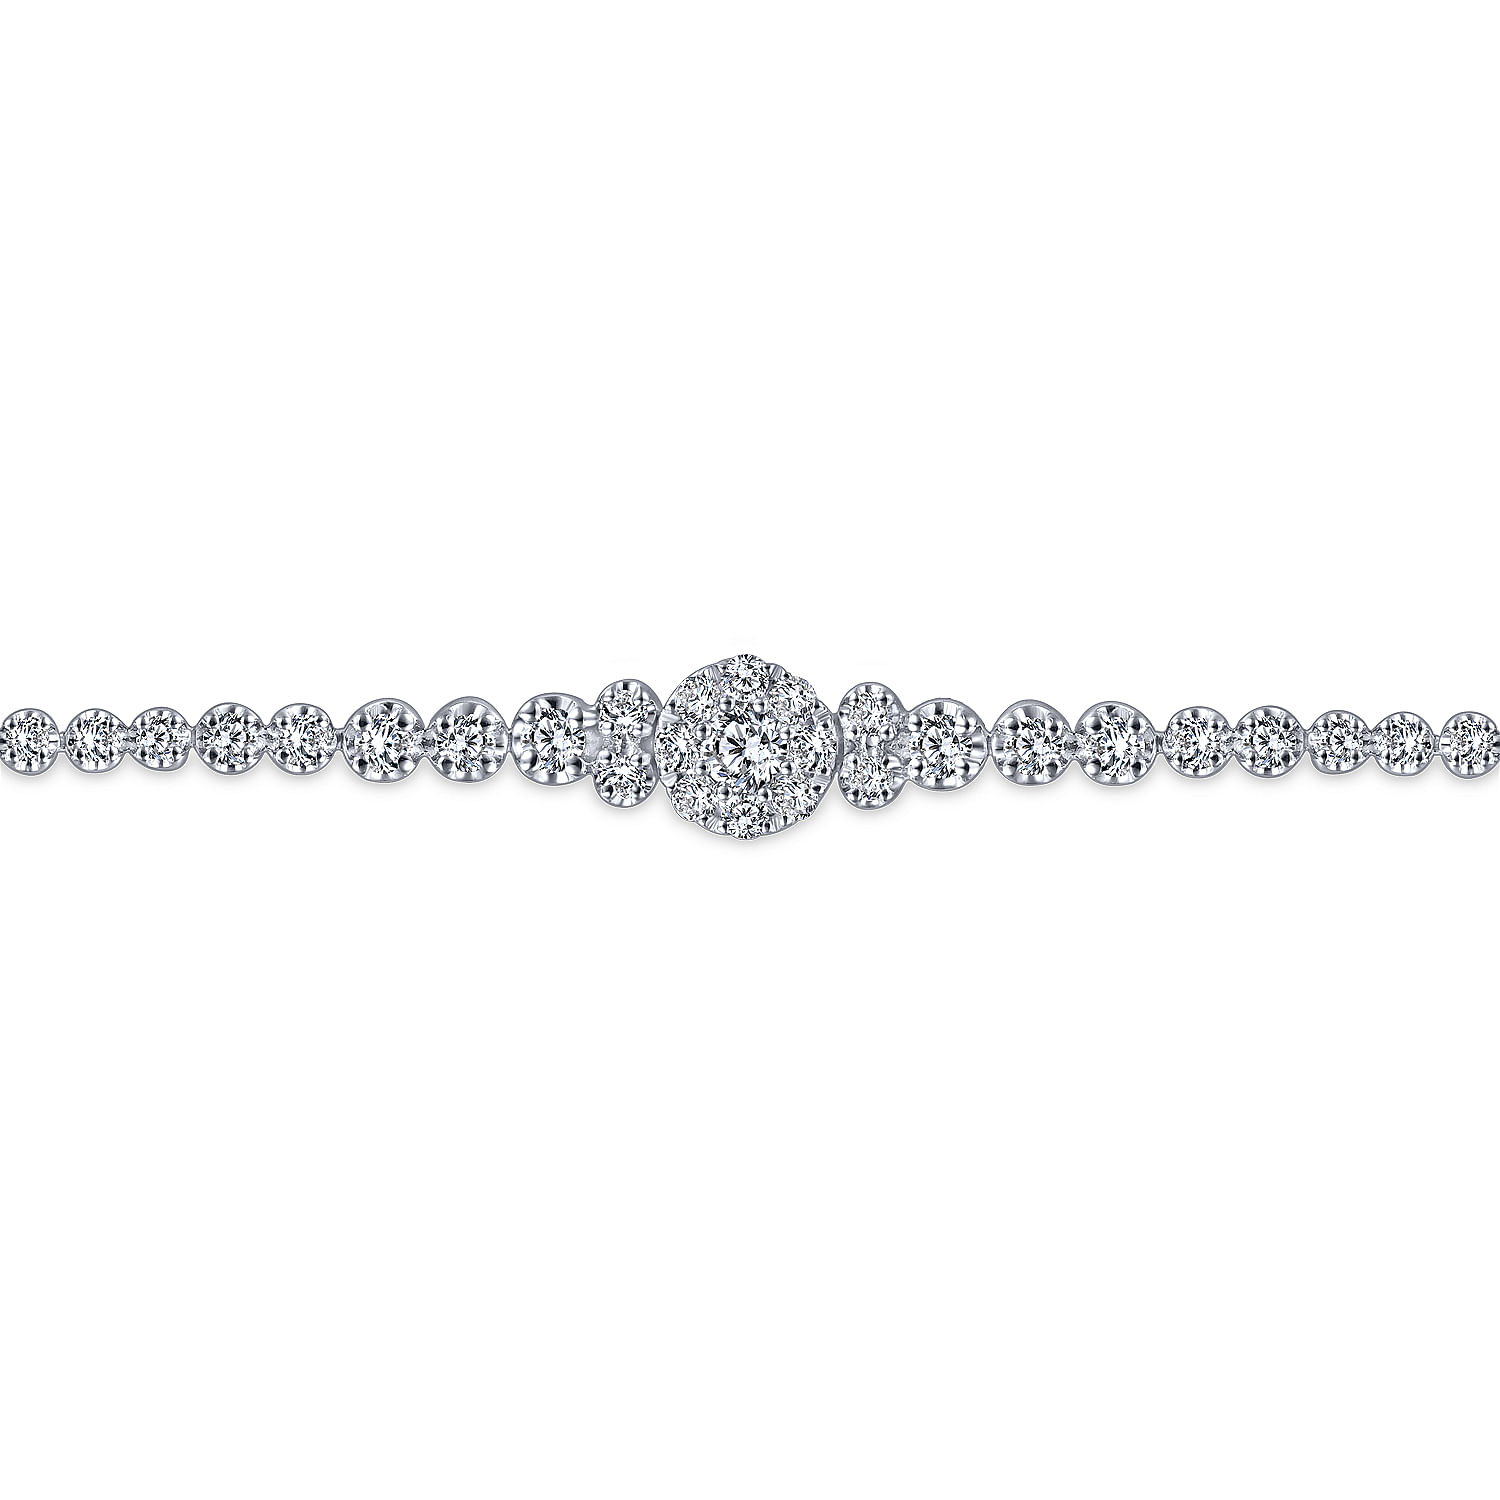 14K White Gold Diamond Tennis Bracelet with Round Cluster Stations